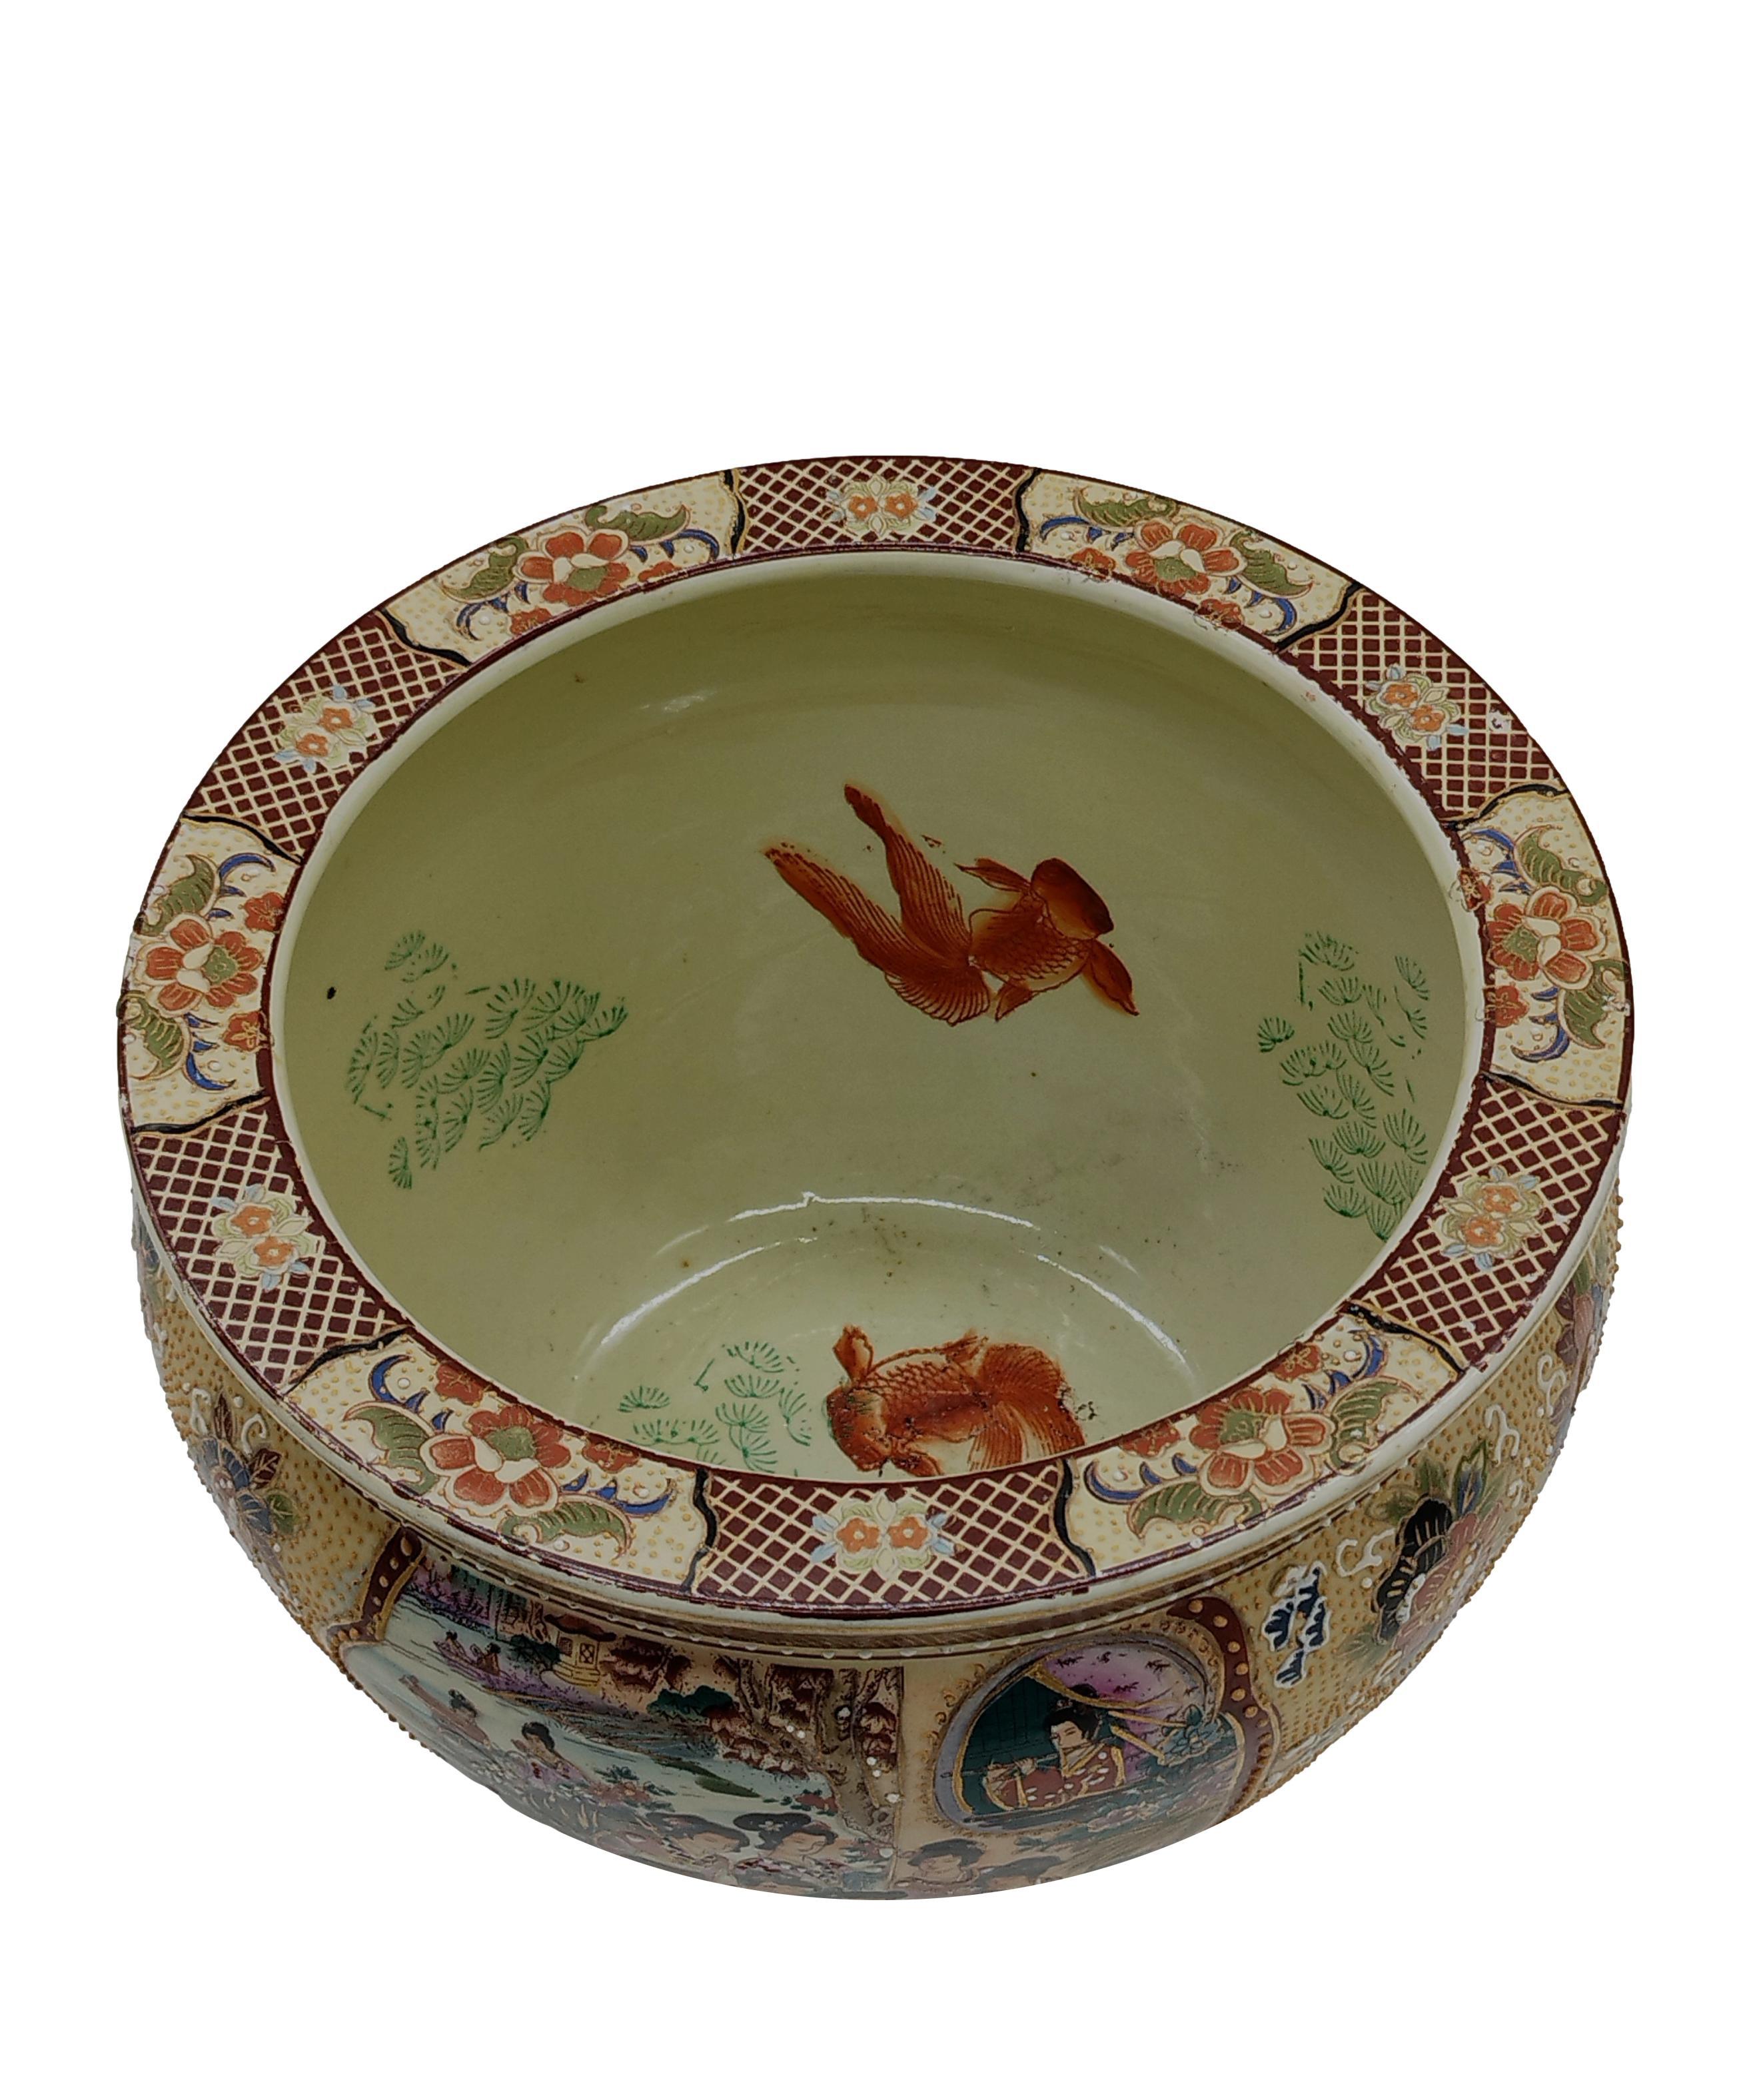 Chinese Porcelain Fish Bowl or Planter with Oriental Decorations, China, 1960s For Sale 1